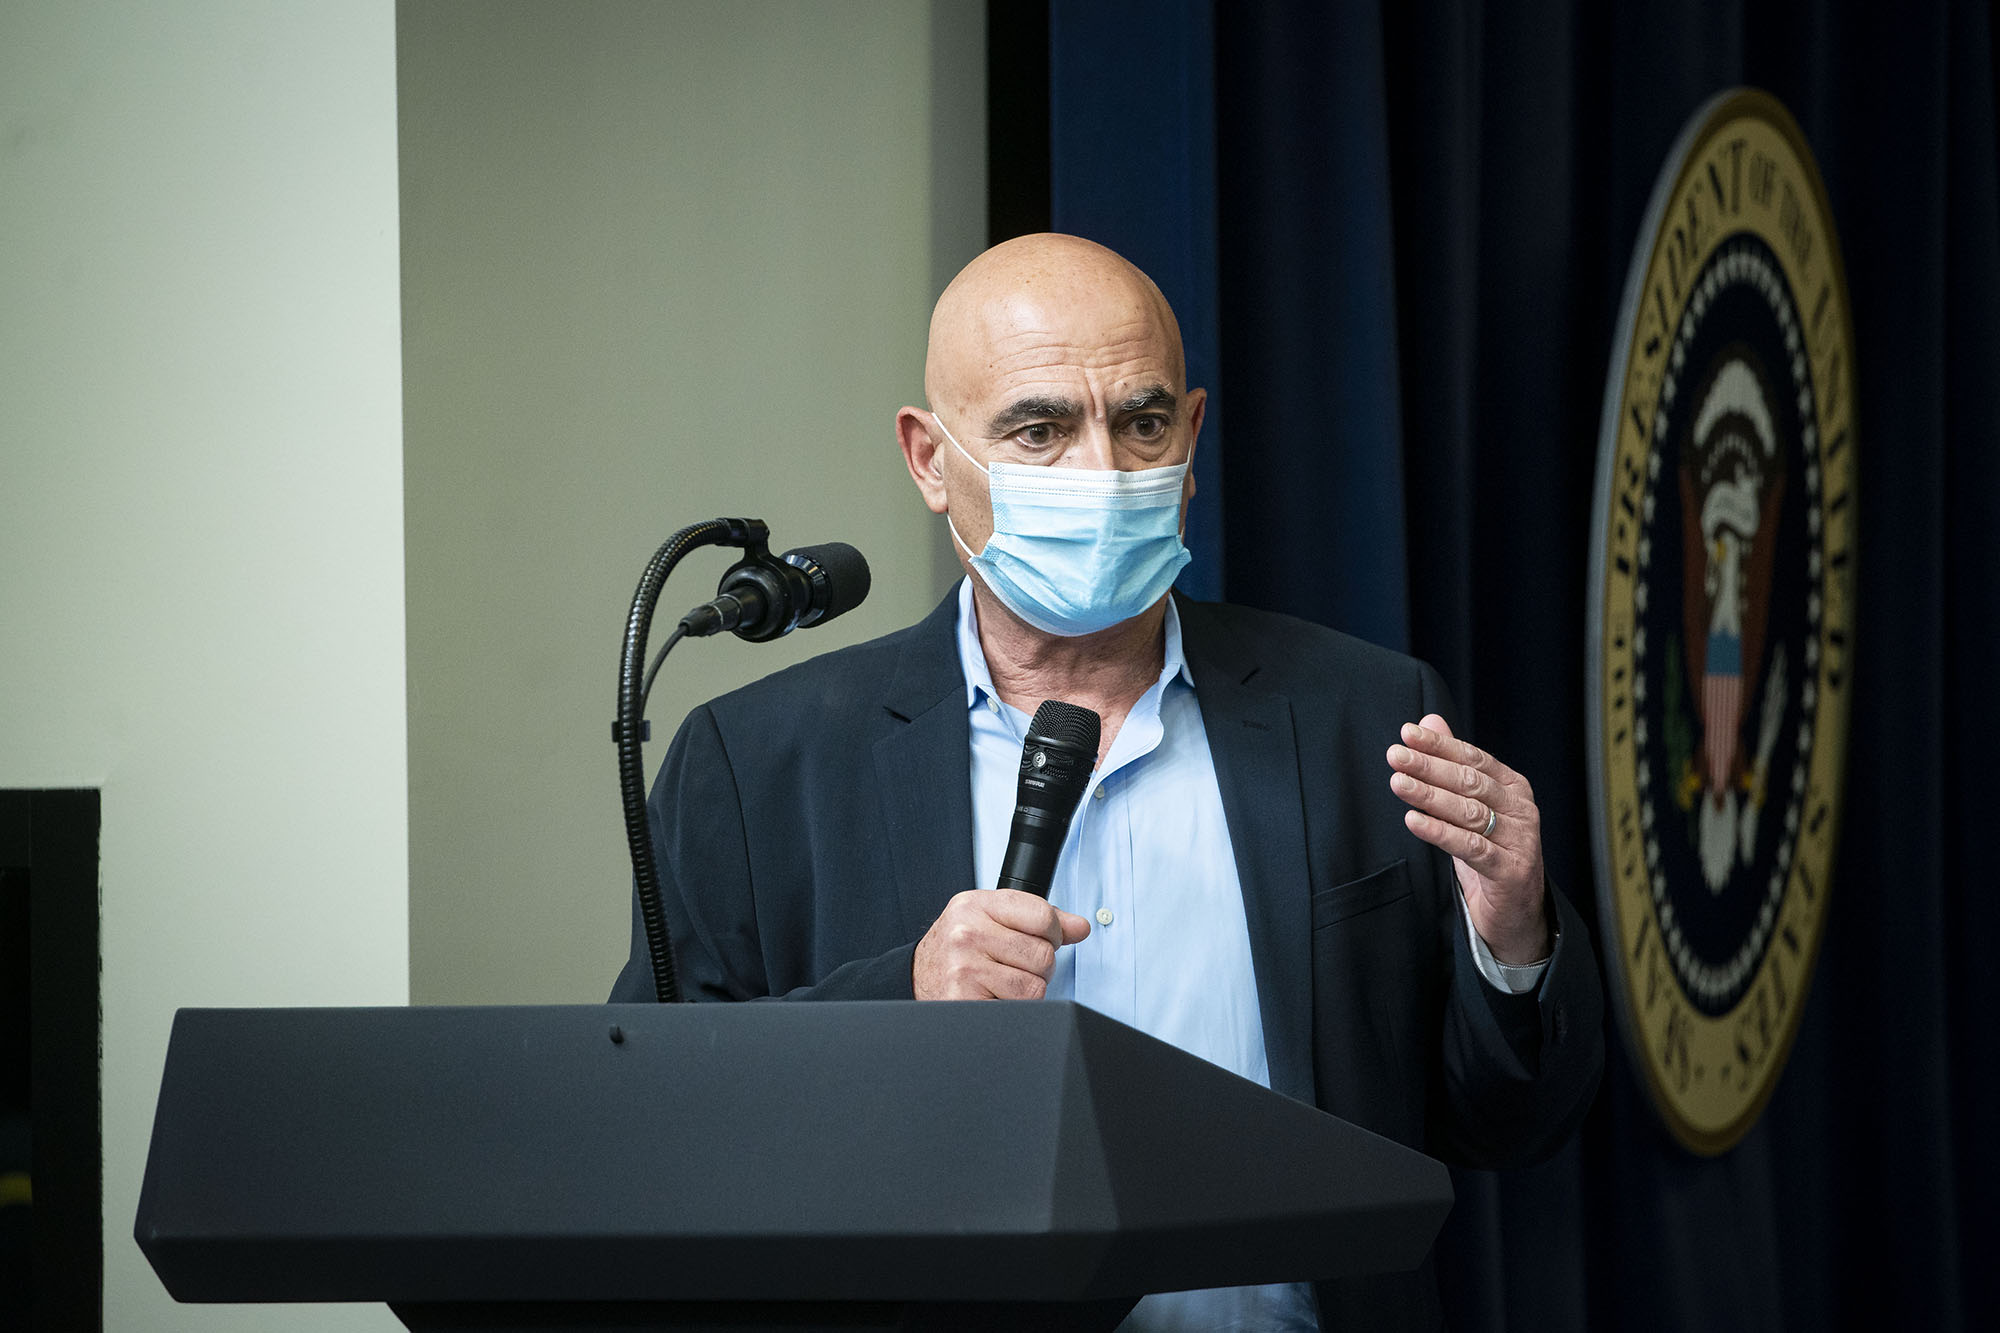 Moncef Slaoui, chief adviser for the Defense Department's Project Warp Speed, speaks during an Operation Warp Speed vaccine summit at the White House in Washington, DC, on Tuesday, December 8. 